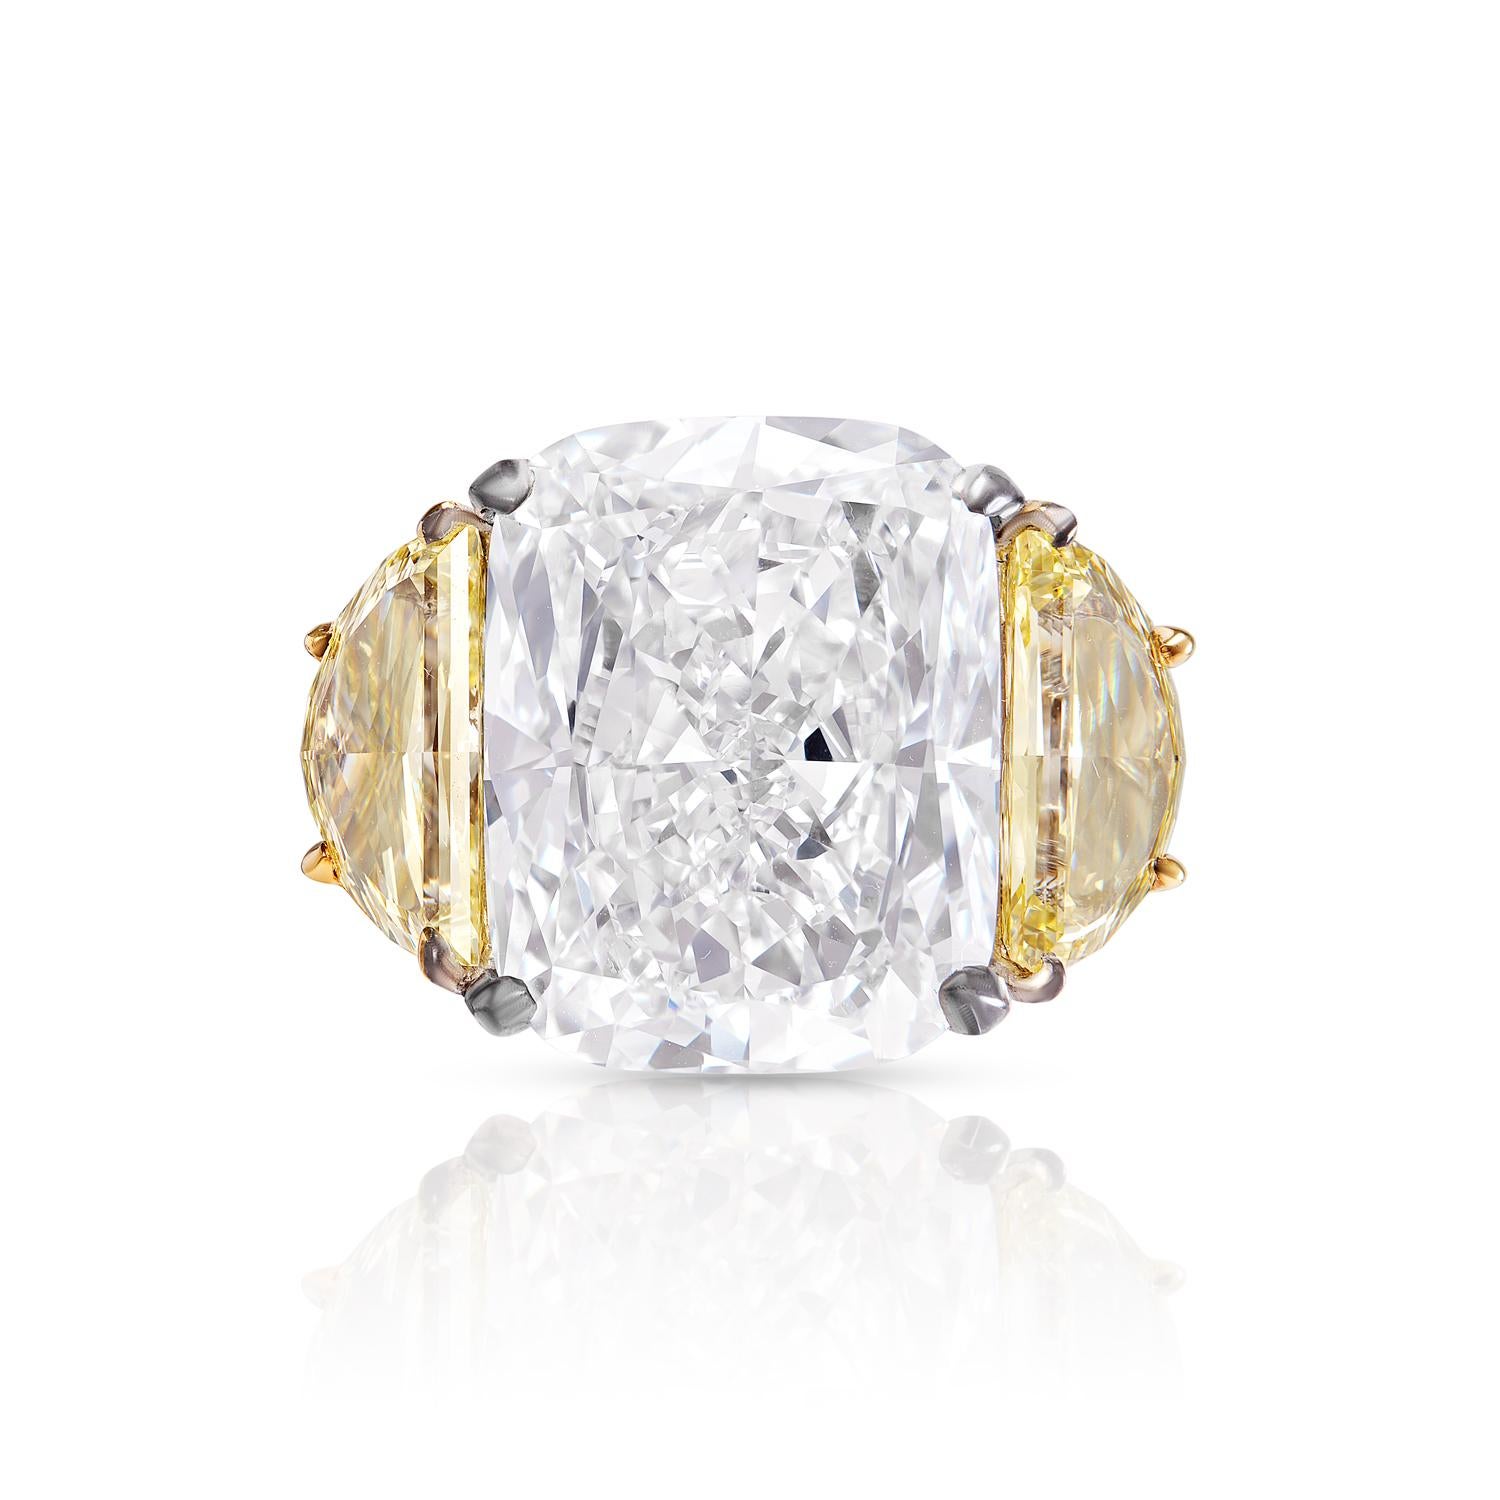 Looking for a truly stunning and unique diamond ring? Look no further than an earth mined diamond! Featuring a 10.01 carat weight in a gorgeous, cushion-cut design, this ring is sure to catch everyone's eye. It is made with platinum and 18-karat